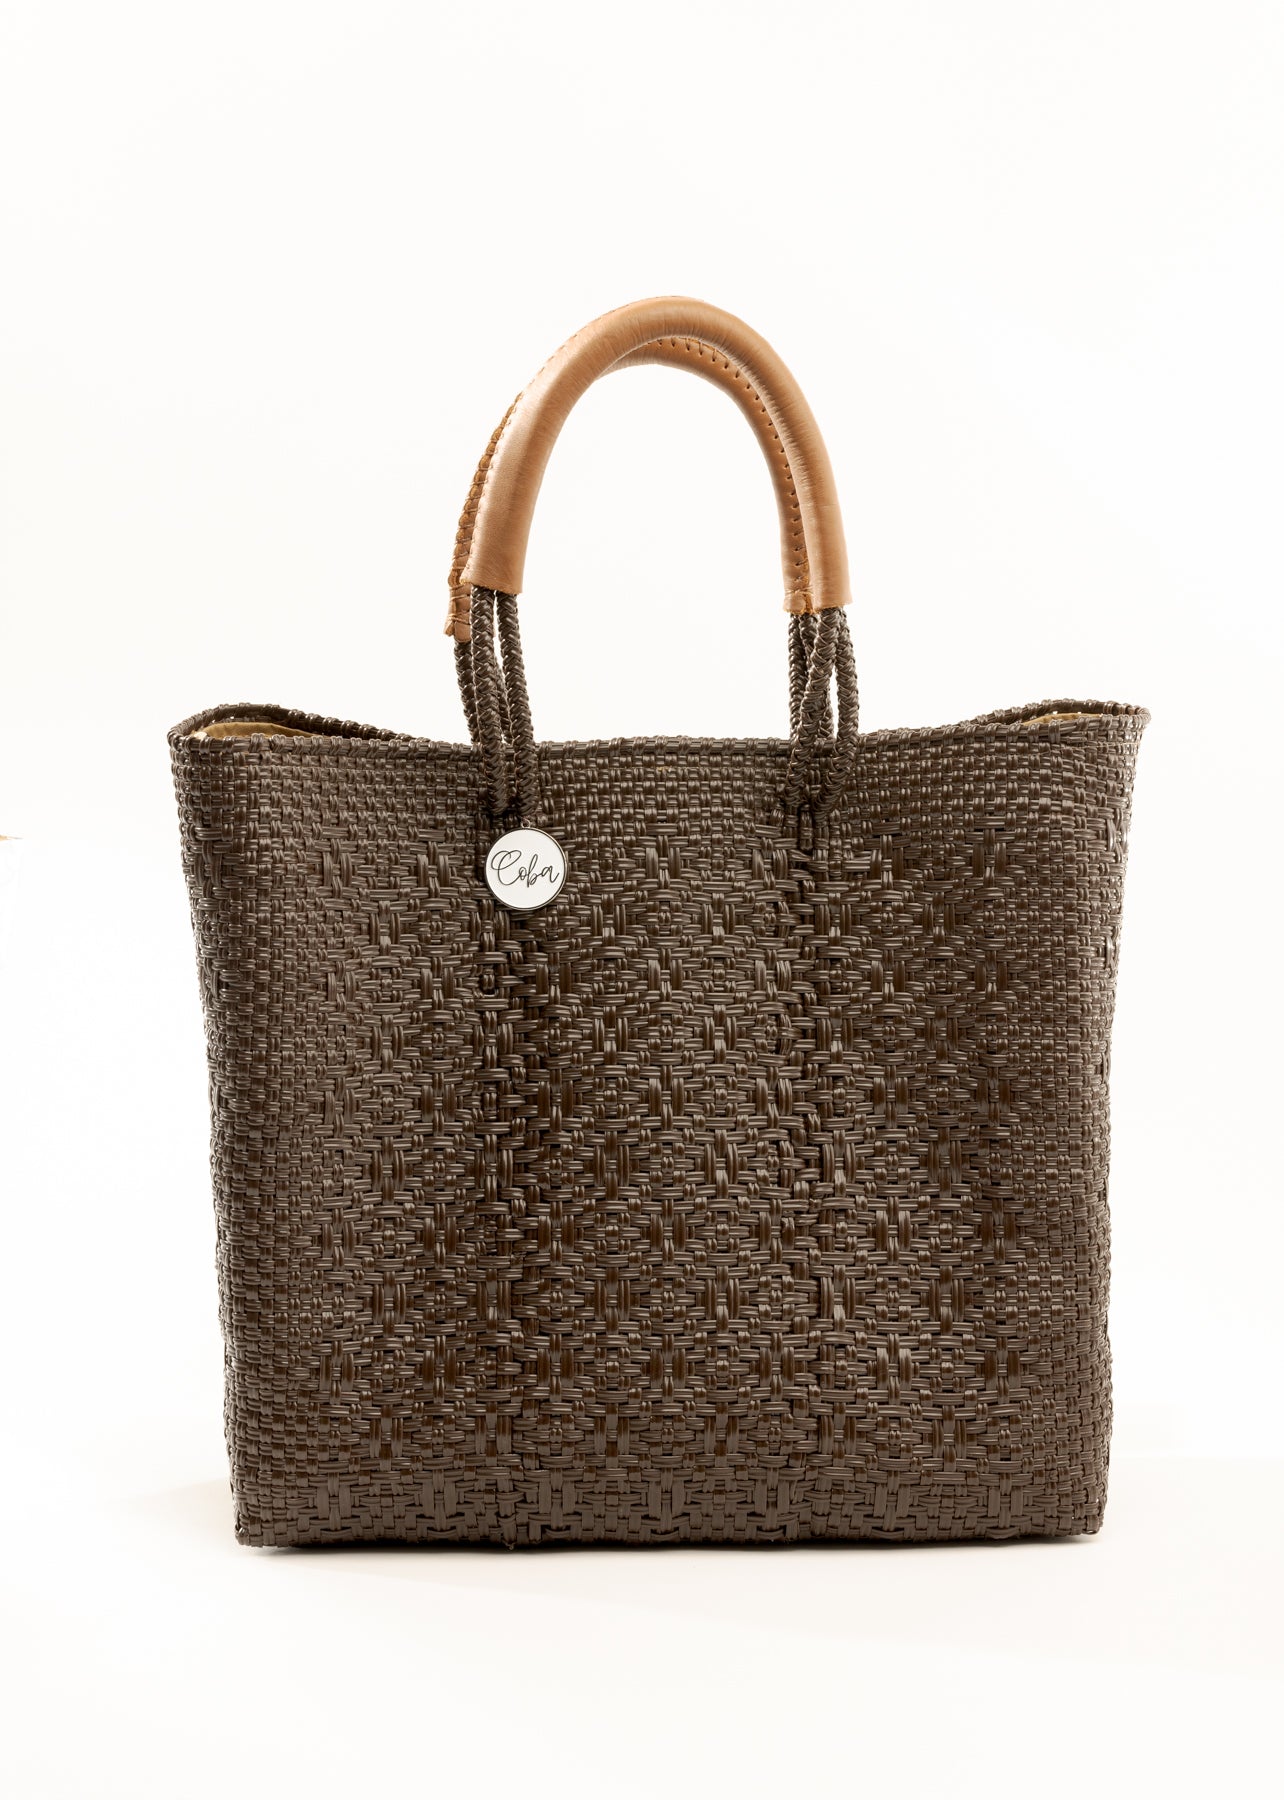 Brown and tan woven handbag made from recycled plastics featuring tan leather handles and silver Coba medallion